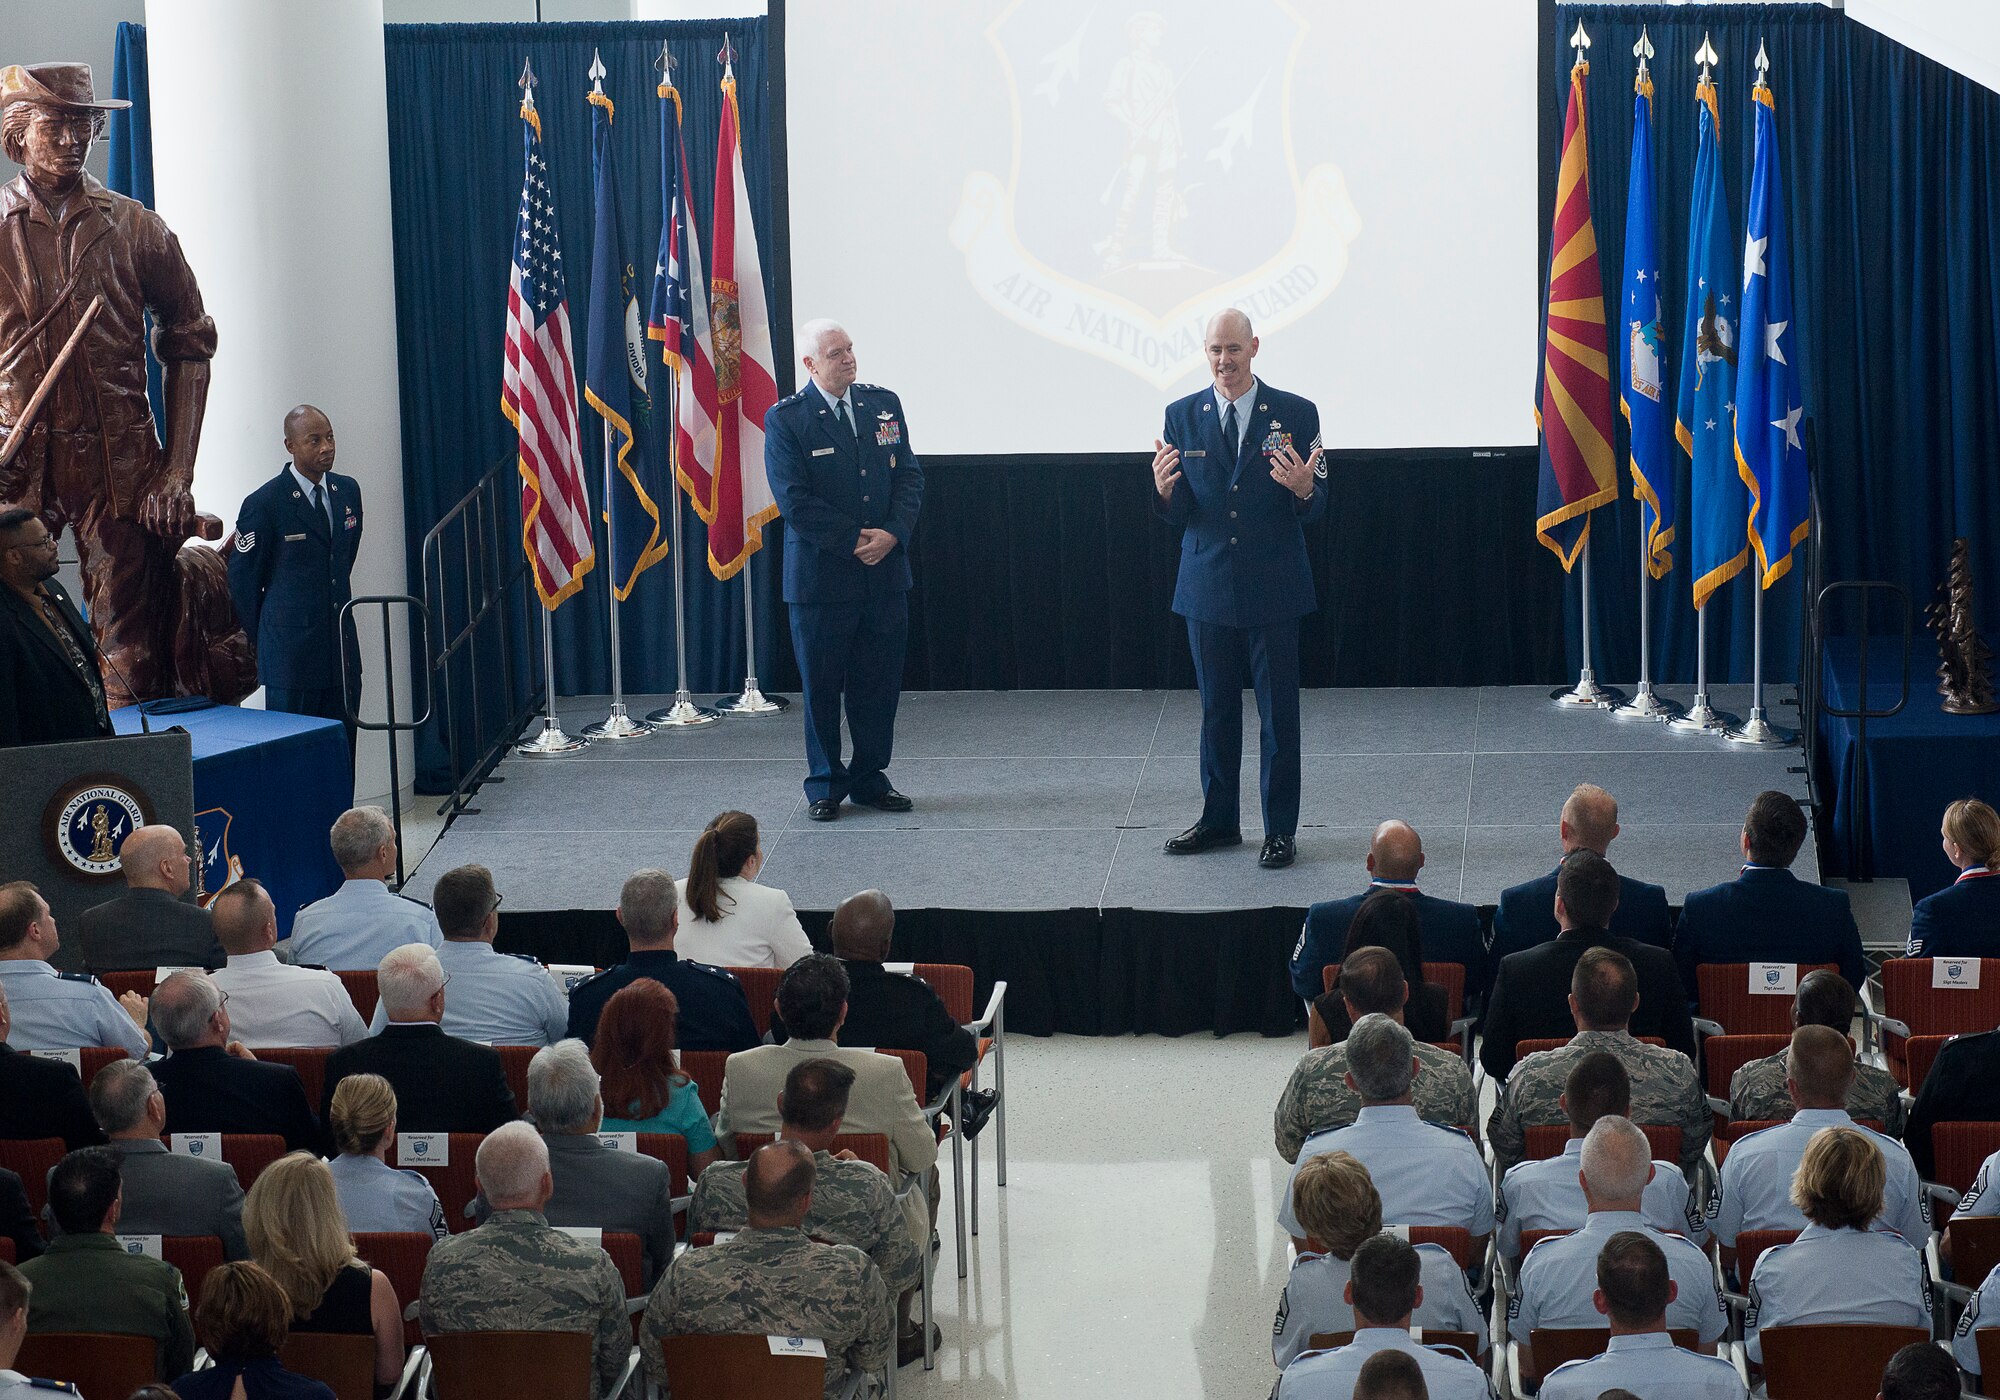 Chief Master Sgt. Ronald C. Anderson, the 12th command chief master sergeant for the Air National Guard, speaks during an all-call honoring the ANG's 2016 Outstanding Airmen of the Year at the Air National Guard Readiness Center on Joint Base Andrews, Md., August 4, 2016. The ceremony is the culmination of the ANG's Focus on the Force Week, a series of events highlighting the importance of professional development at all levels, and the recognition of accomplishments throughout the enlisted corps. The OAY winners are Staff Sgt. Jennifer Masters, Airman of the Year; Tech. Sgt. Nicholas Jewell, Non-Commissioned Officer of the Year; Senior Master Sgt. Mark Farmer, Senior Non-Commissioned Officer of the Year; and Senior Master Sgt. Jack Minaya, First Sergeant of the Year. (U.S. Air National Guard photo by Staff Sgt. John Hillier) 